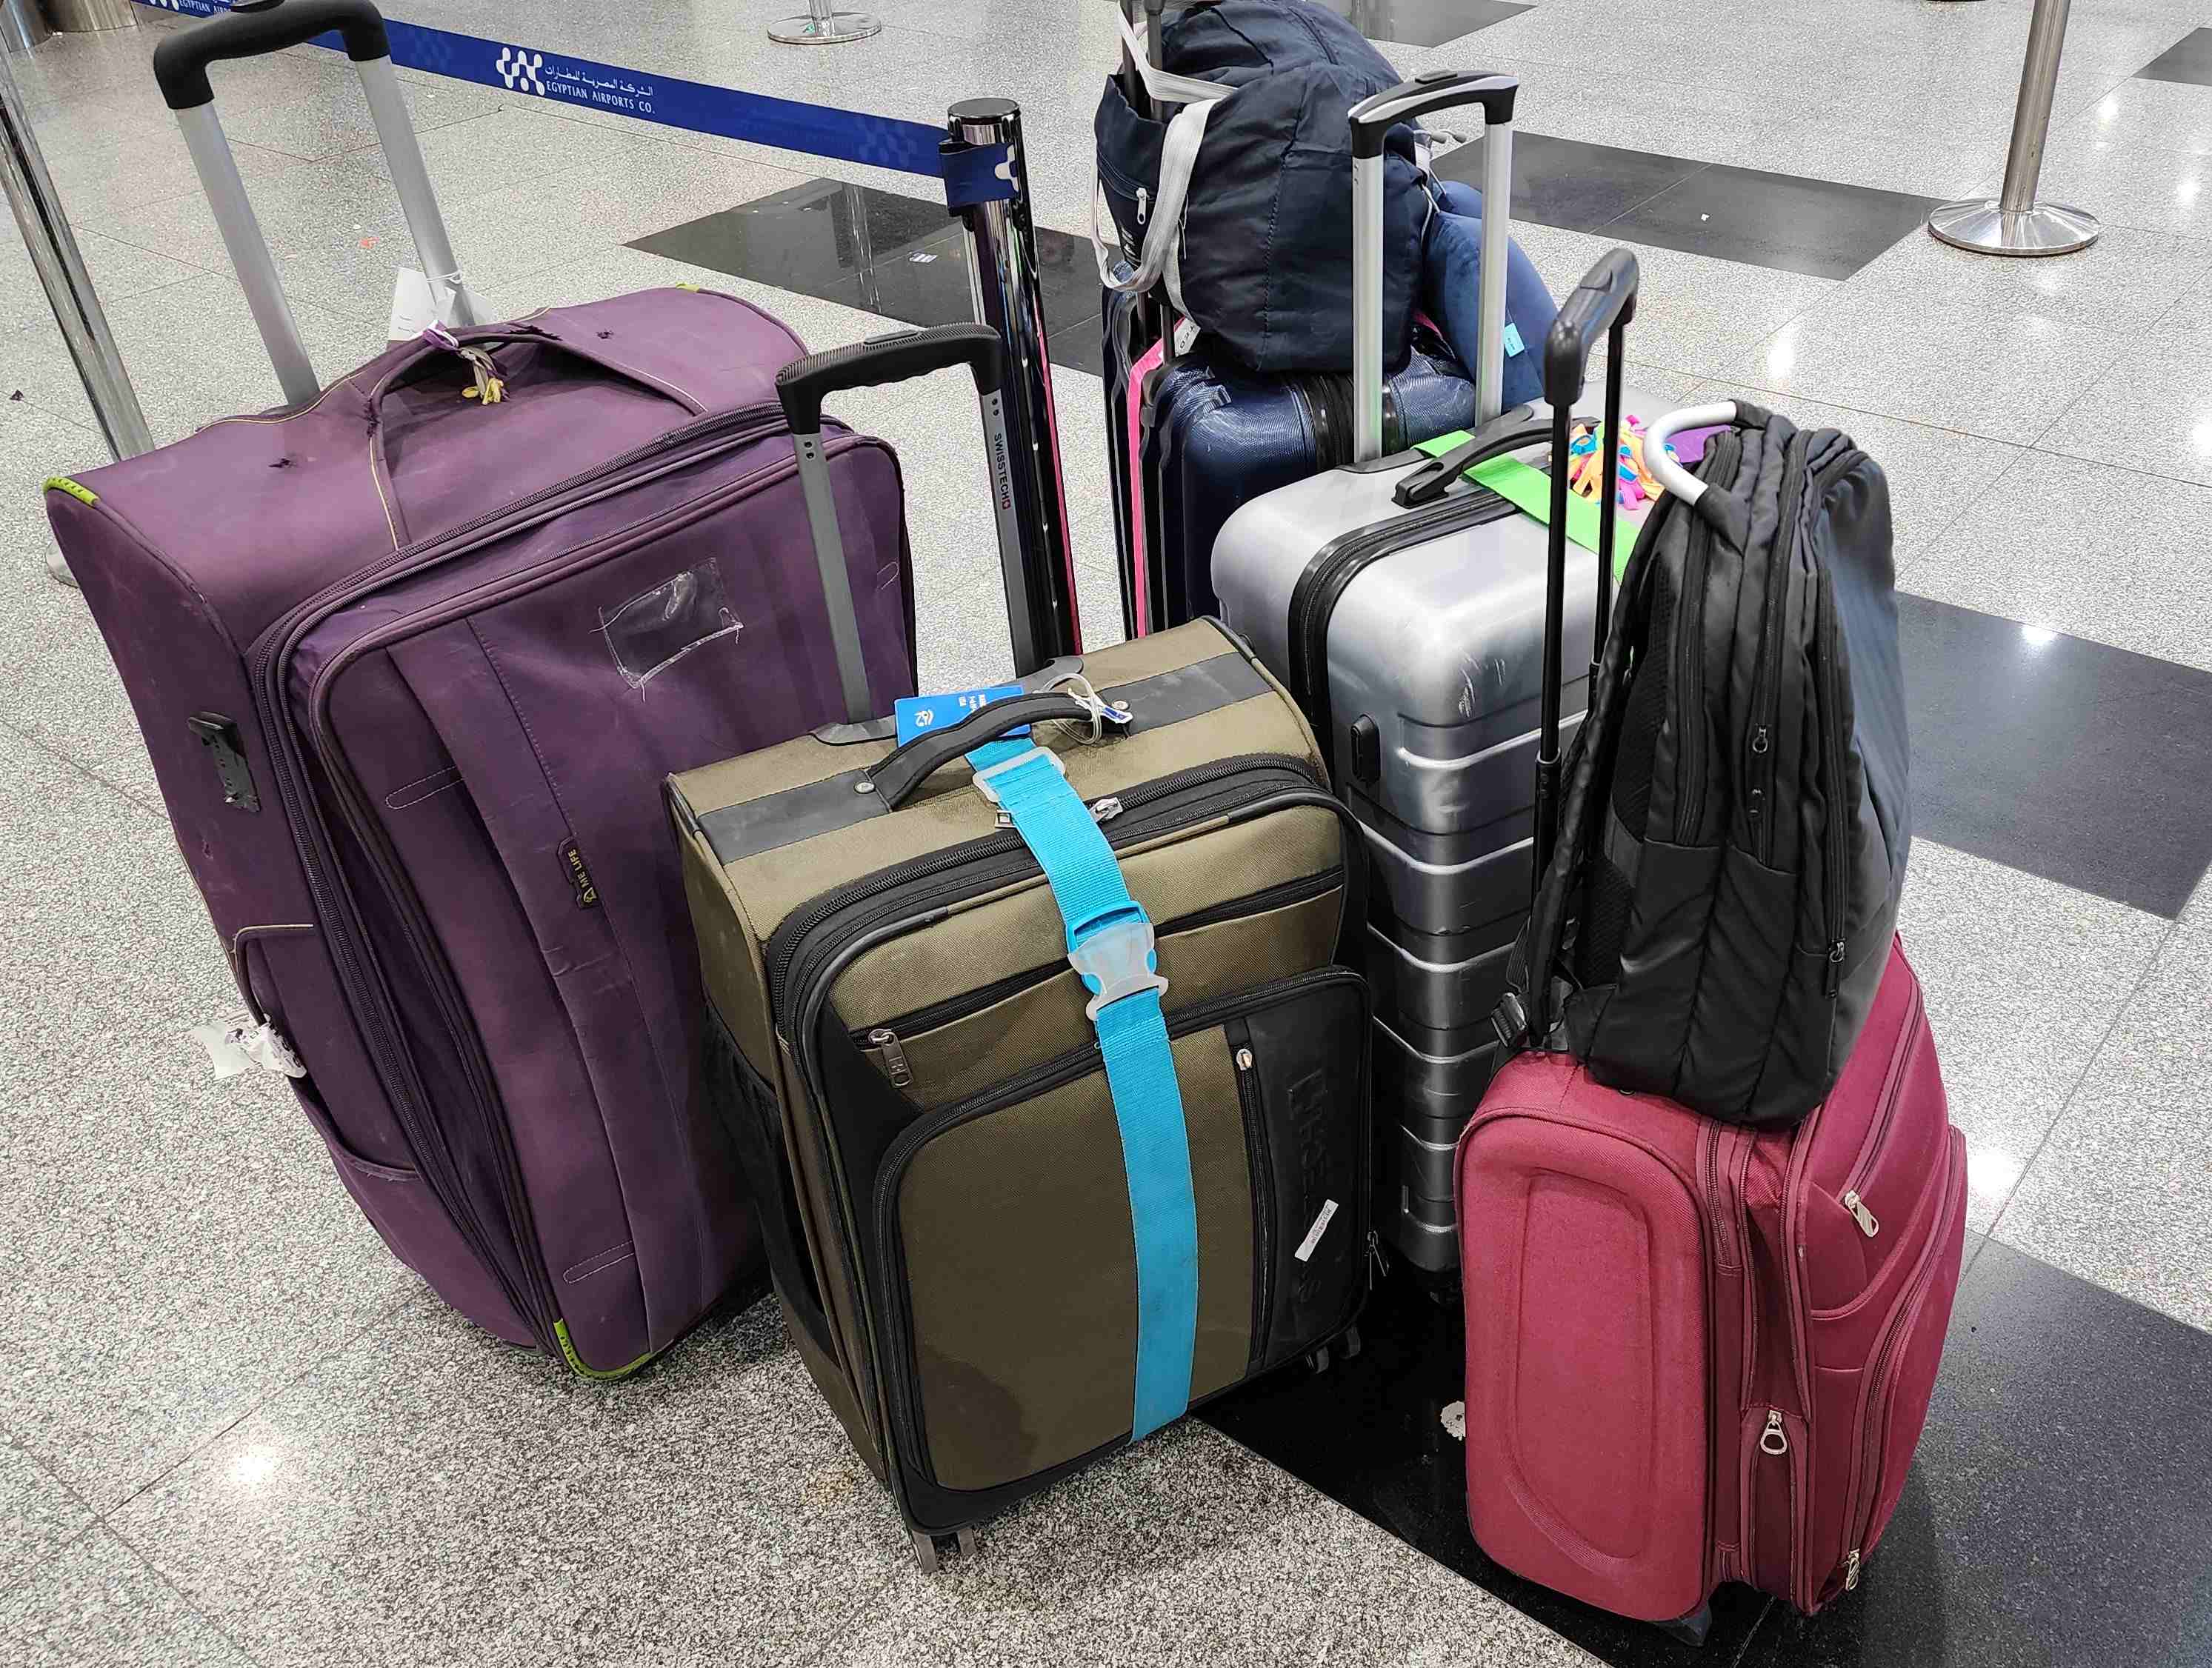 A pile of luggage at an airport